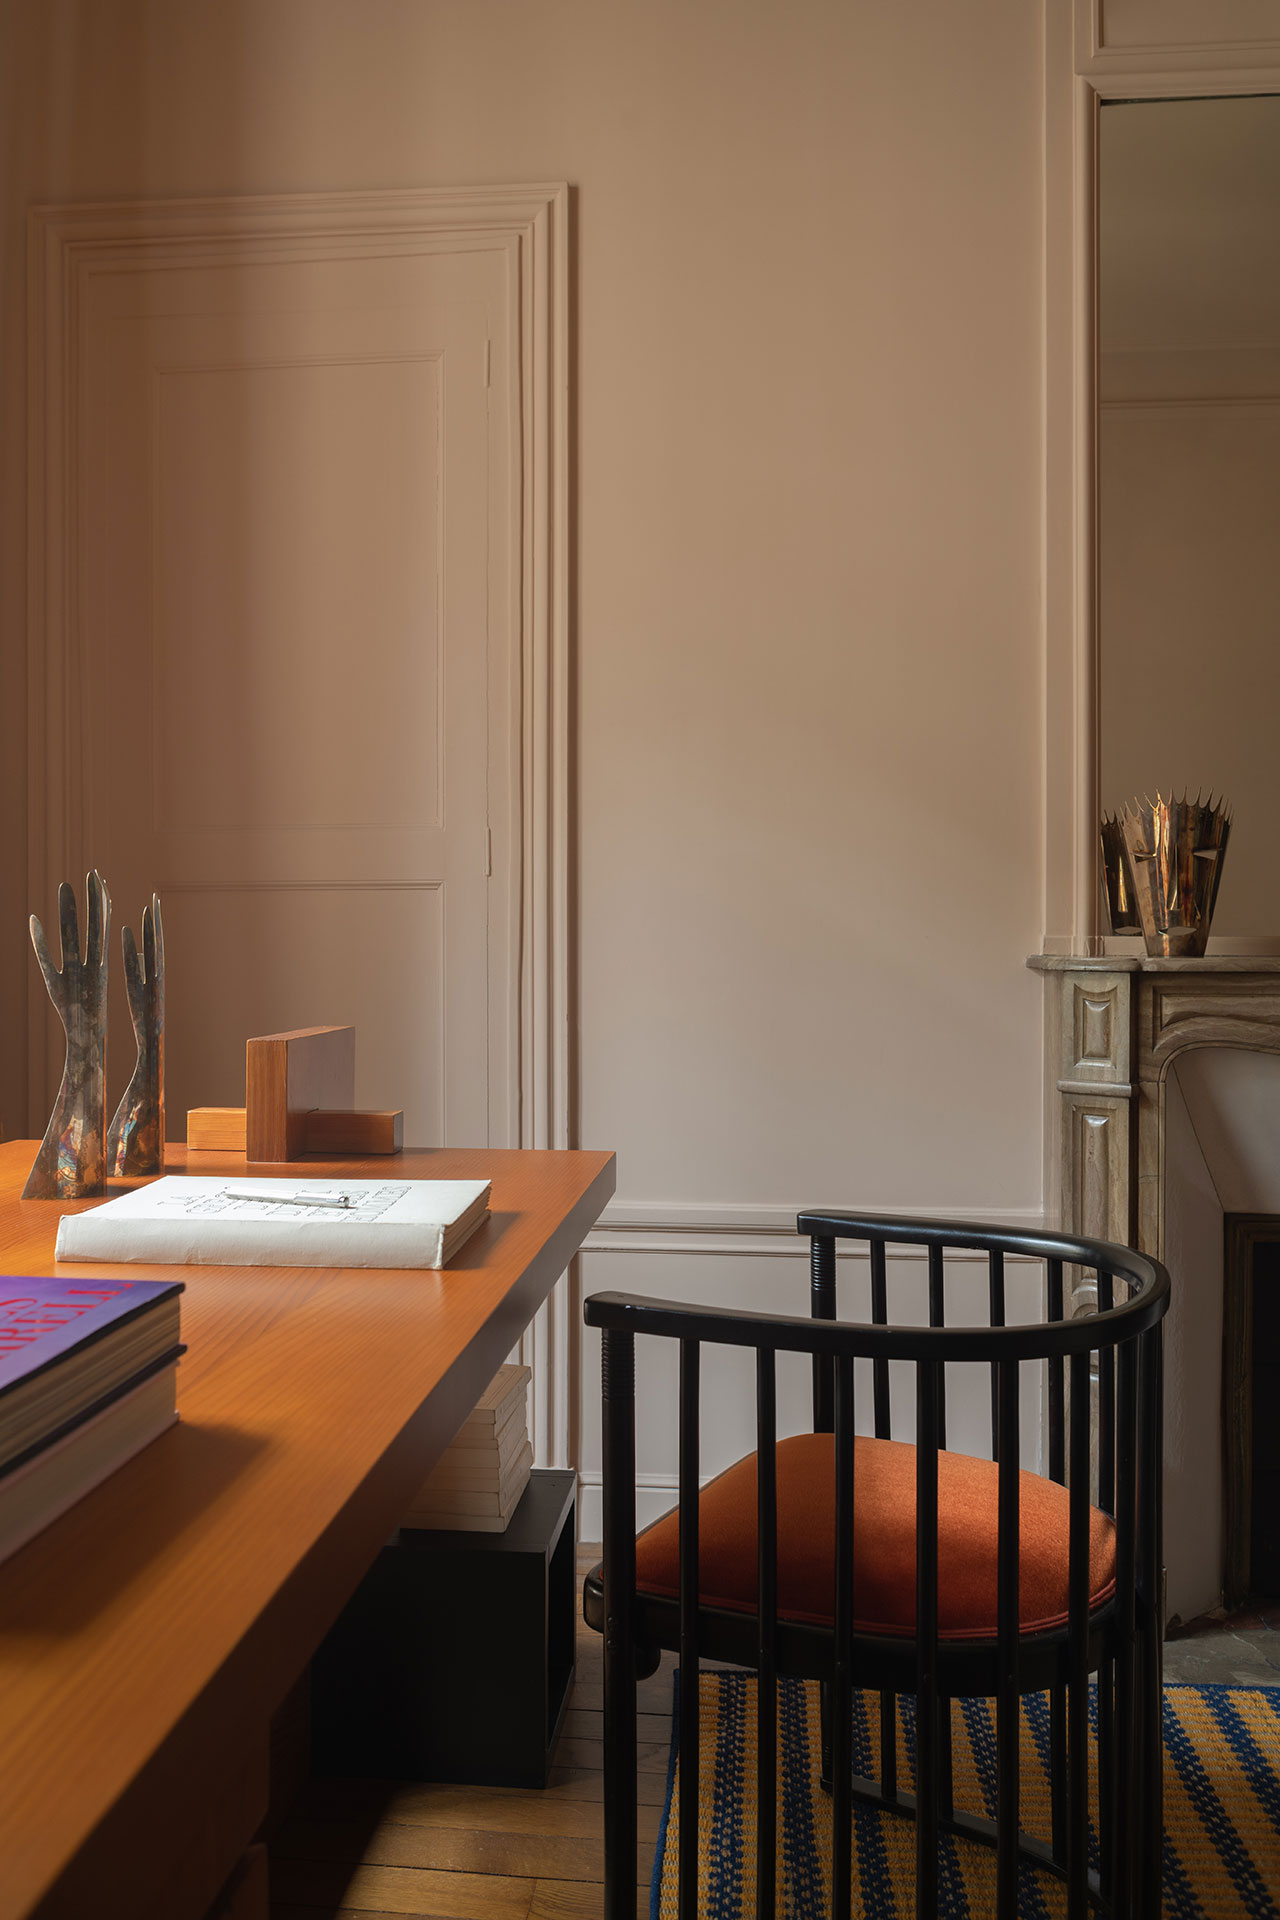 Photography by Giulio Ghirardi.
Featured: Desk from Galerie Béton Brut; Lacquered metal lamp by Gino Sarfatti for Arteluce (Galerie Romain Morandi); 'Mains' sculpture by Gio Ponti for Christofle; Armchair in steambent and lacquered beech and velvet upholstery by Josef Hoffmann for J. &amp; J. Kohn (Galerie Romain Morandi); 'Carmina' carpet by Casa Lopez.